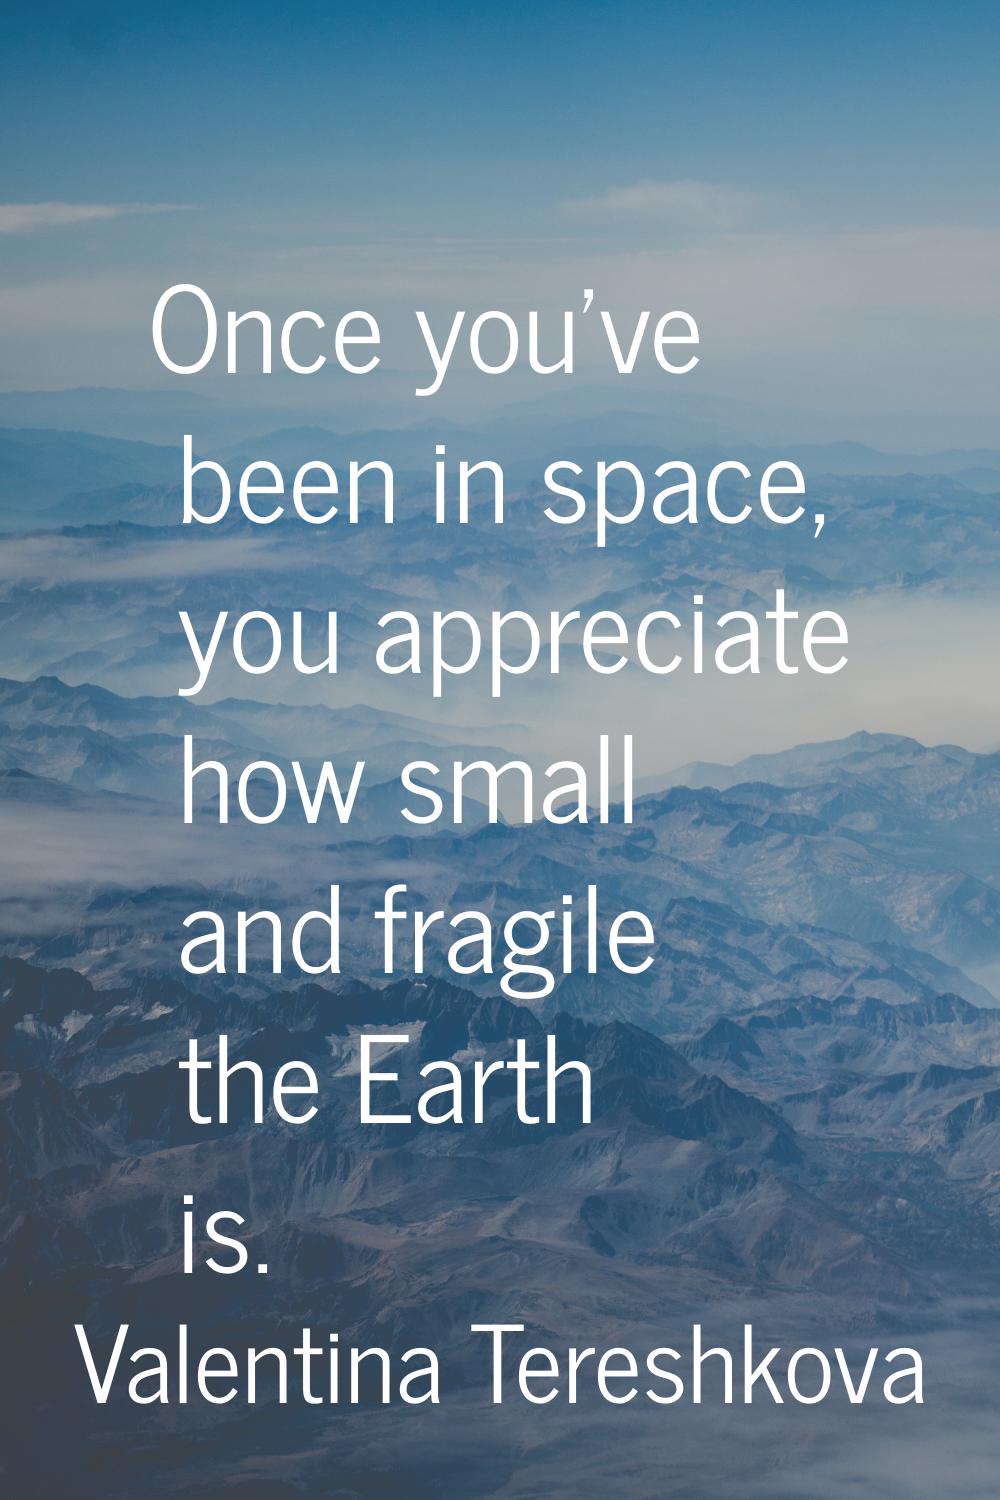 Once you've been in space, you appreciate how small and fragile the Earth is.